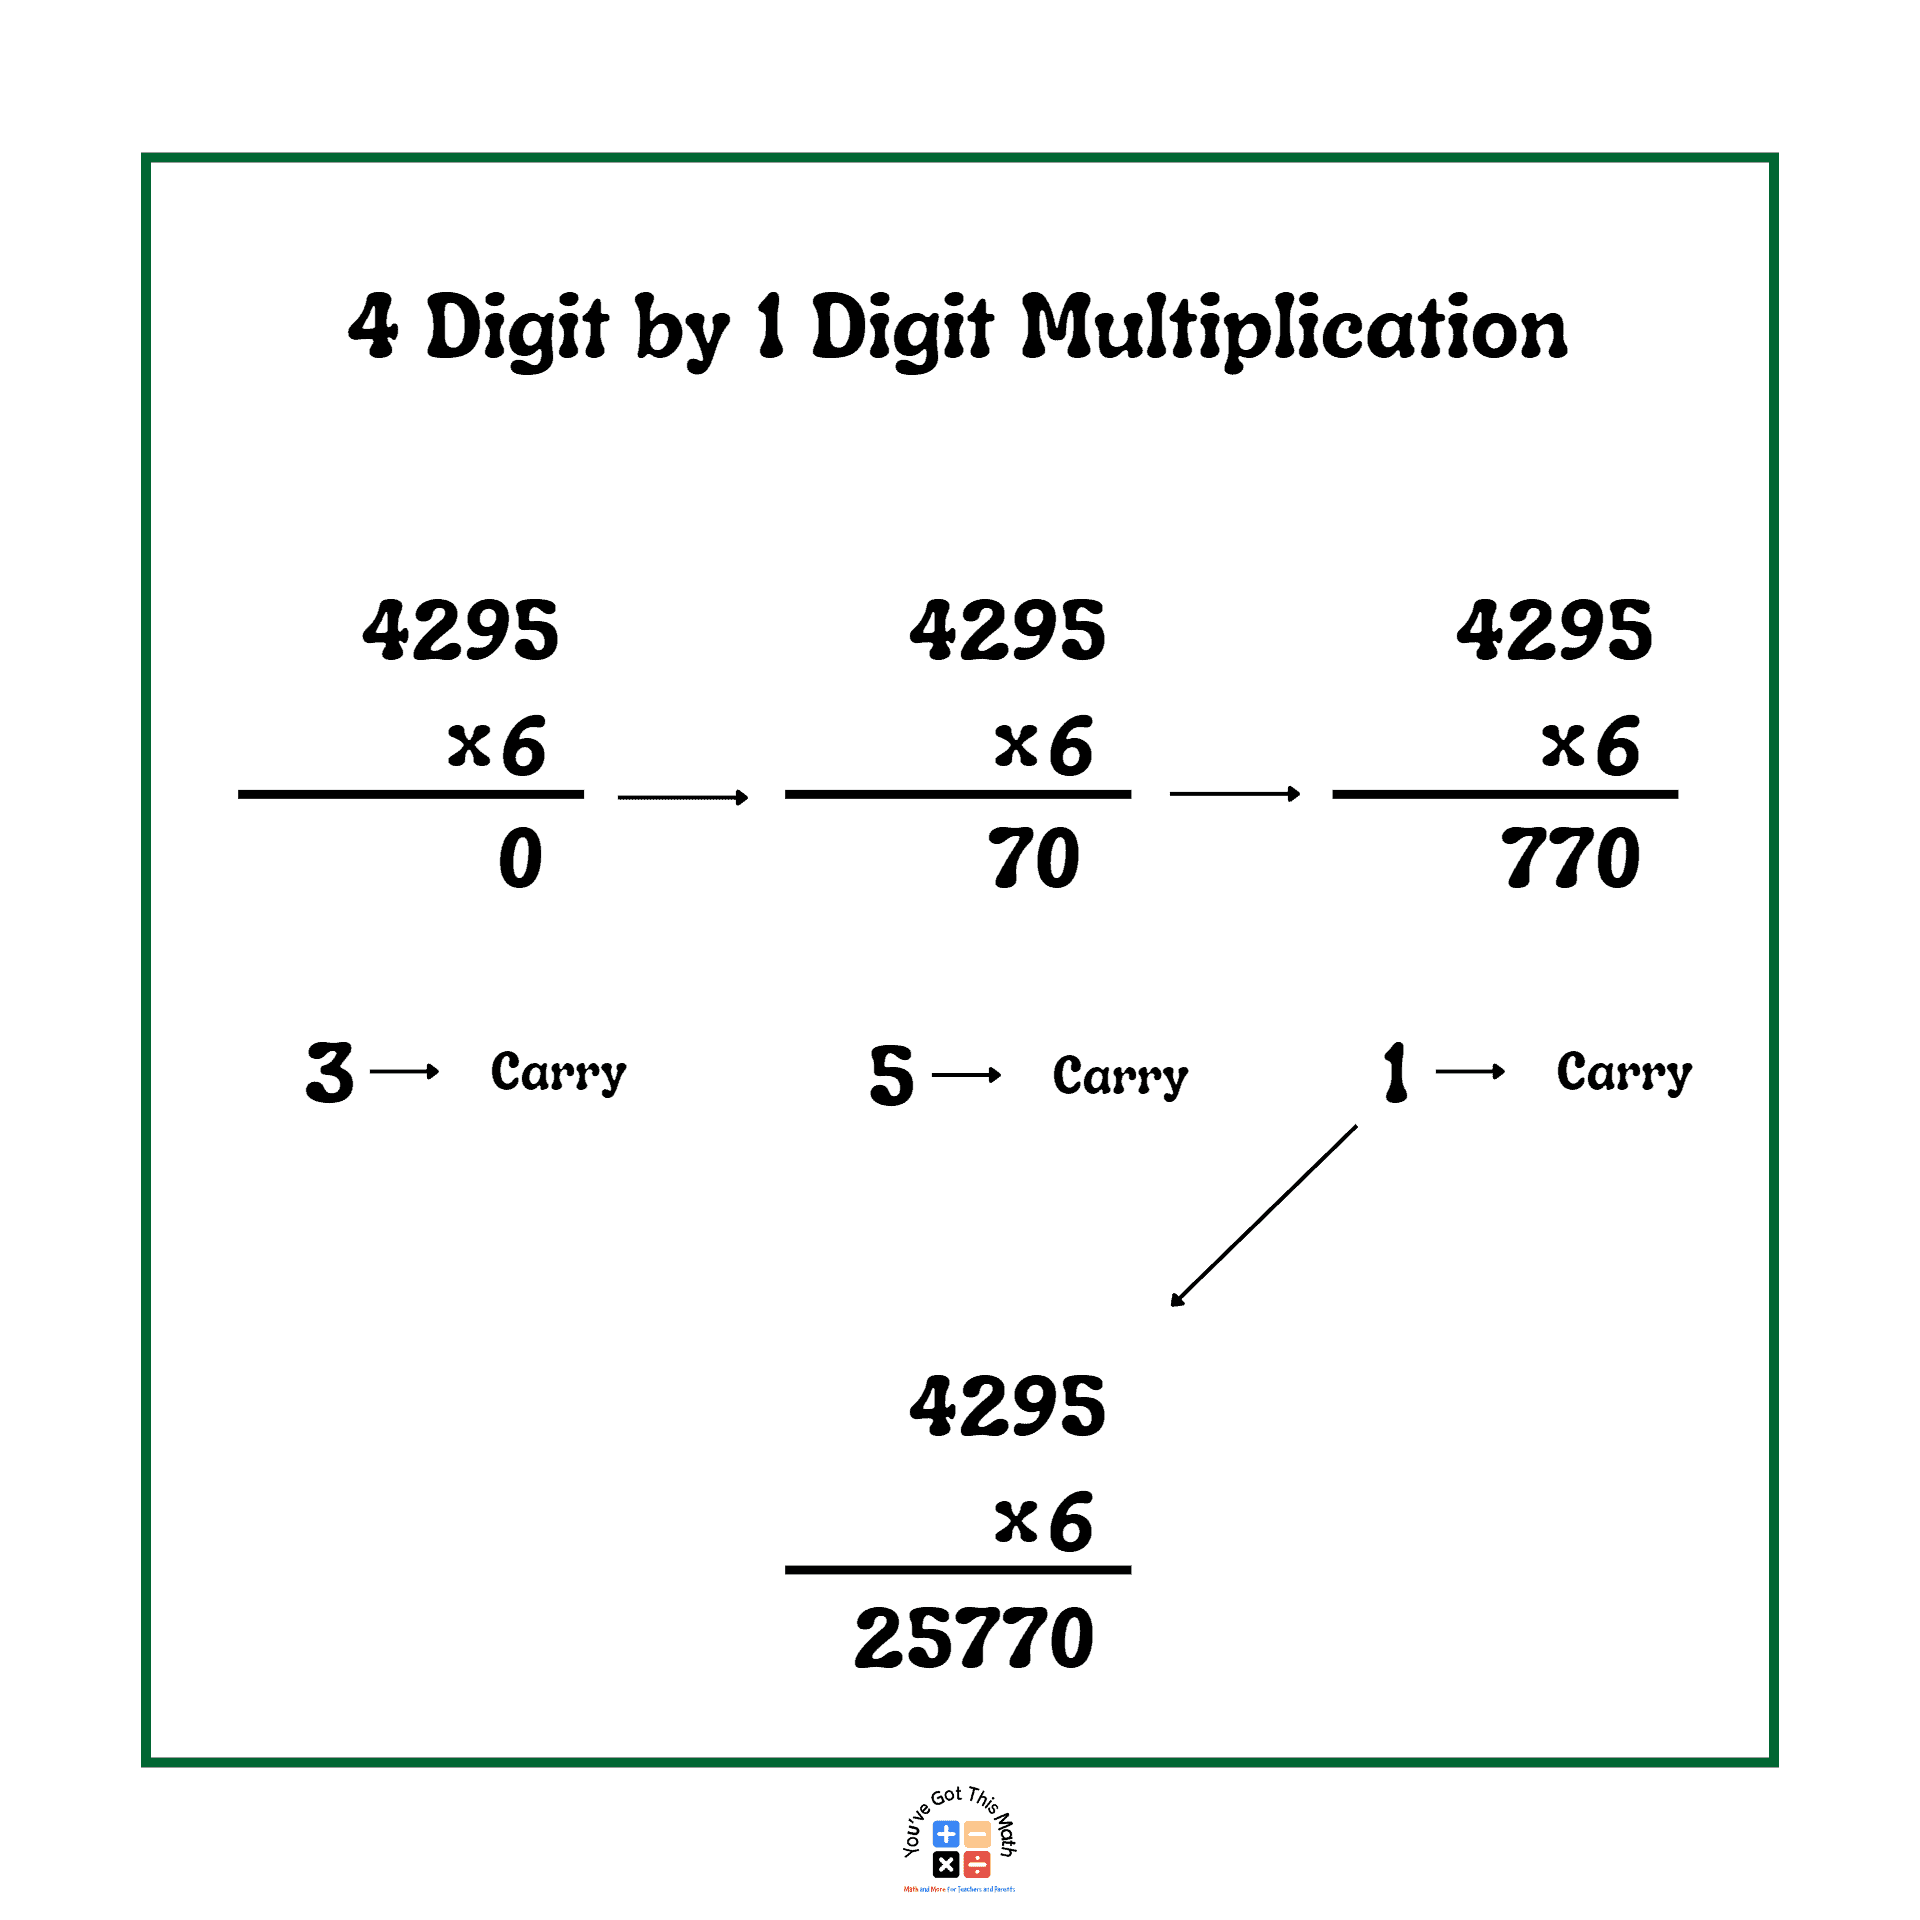 4 digit by 1 digit multiplications to calculate word problems